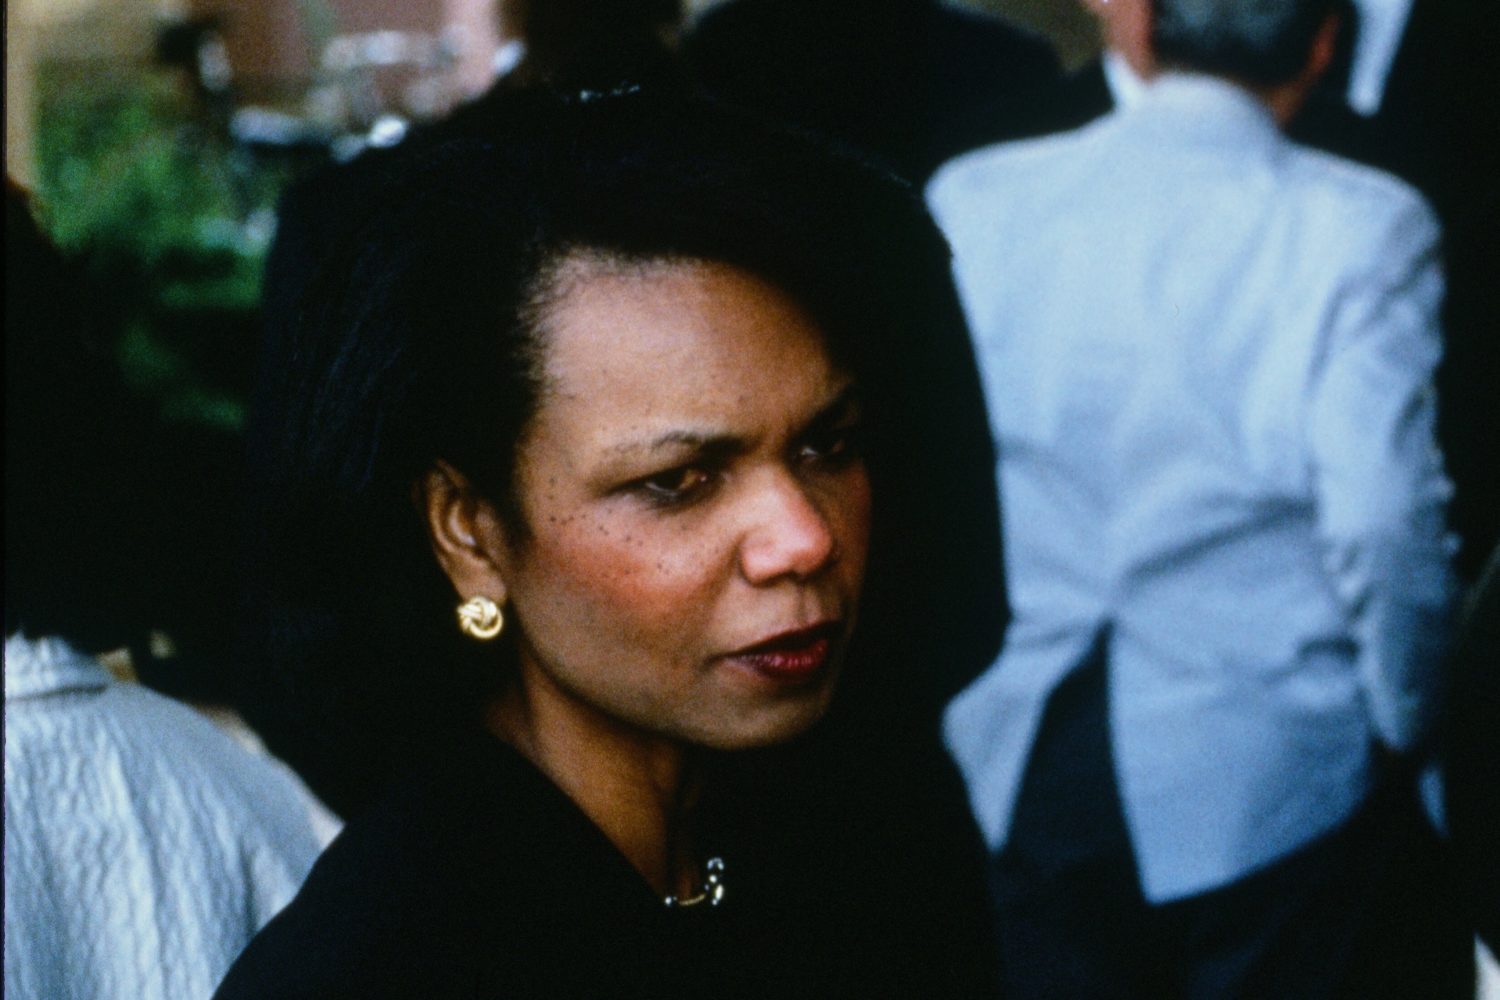 Hewlett-Packard board member Condoleezza Rice in black clothing at Dave Packard's memorial service in 1996.